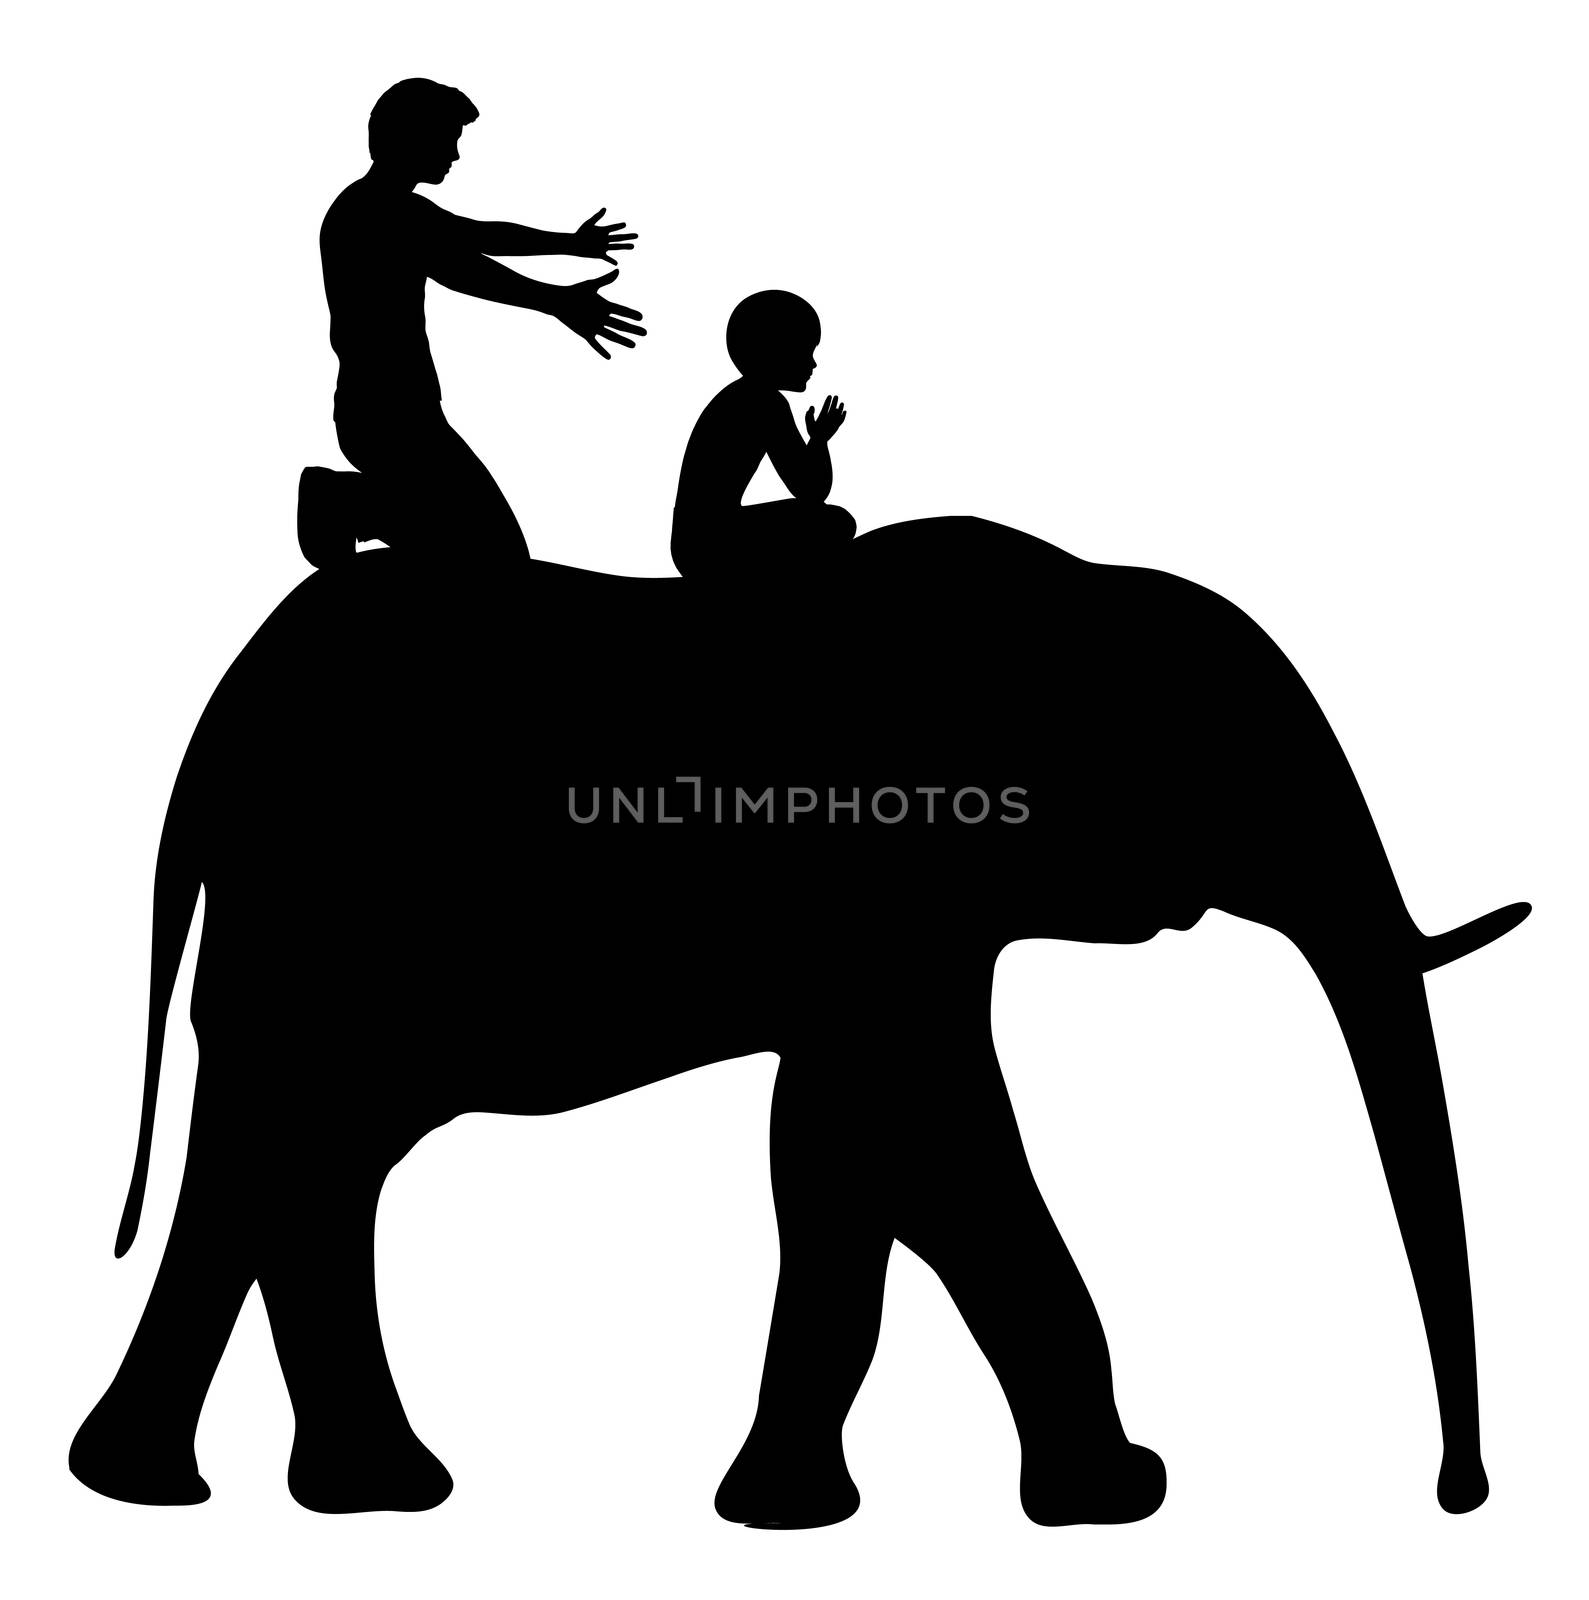 Father is teaching child to ride an elephant, educational metaphor